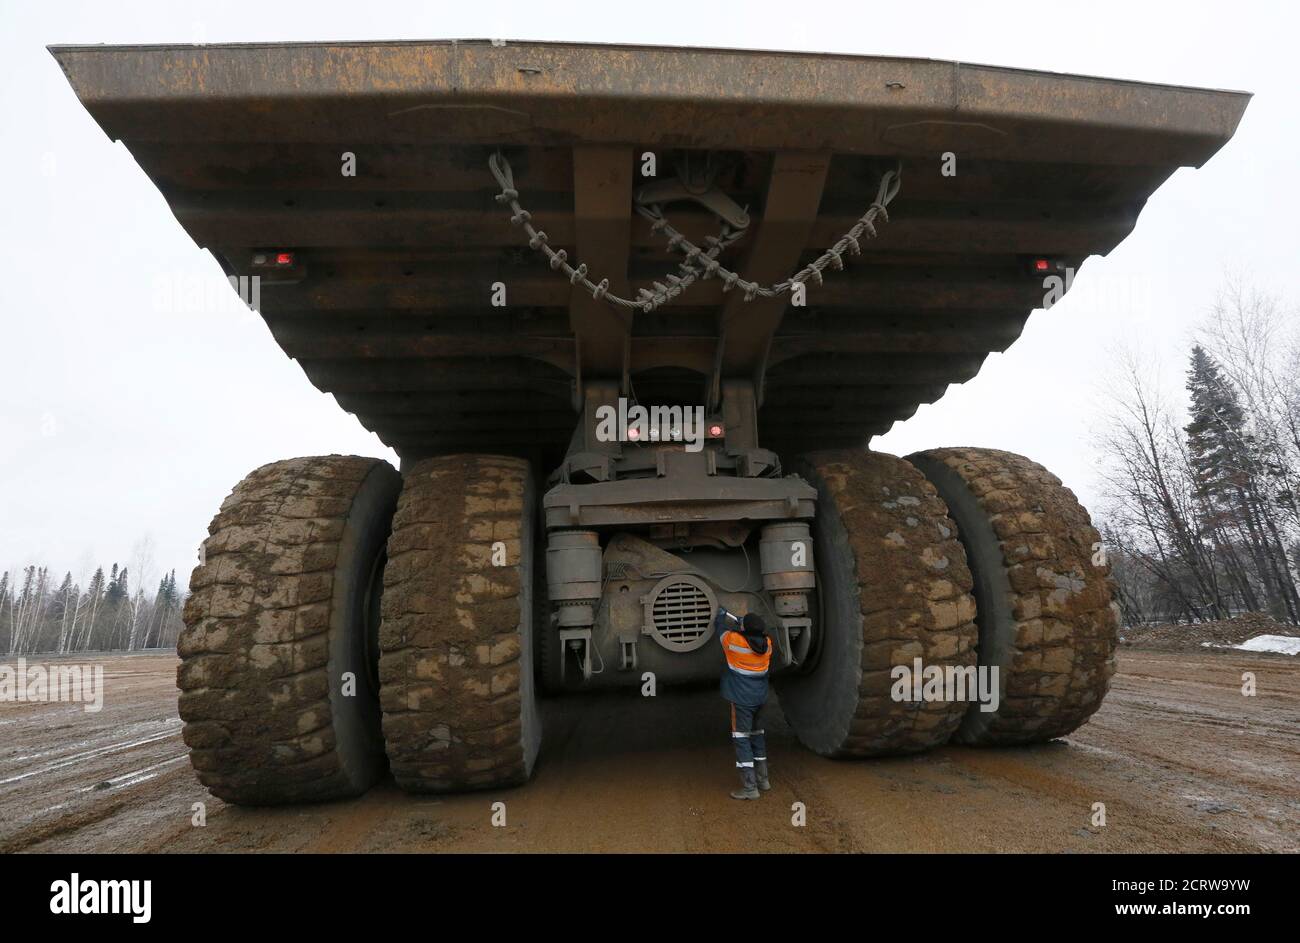 A crew member operating a BelAZ 75710 truck works at a parking of the  'Chernigovets' coal company, outside the town of Beryozovsky, Kemerovo  region, Siberia, Russia, April 4, 2016. Belarusian made world's